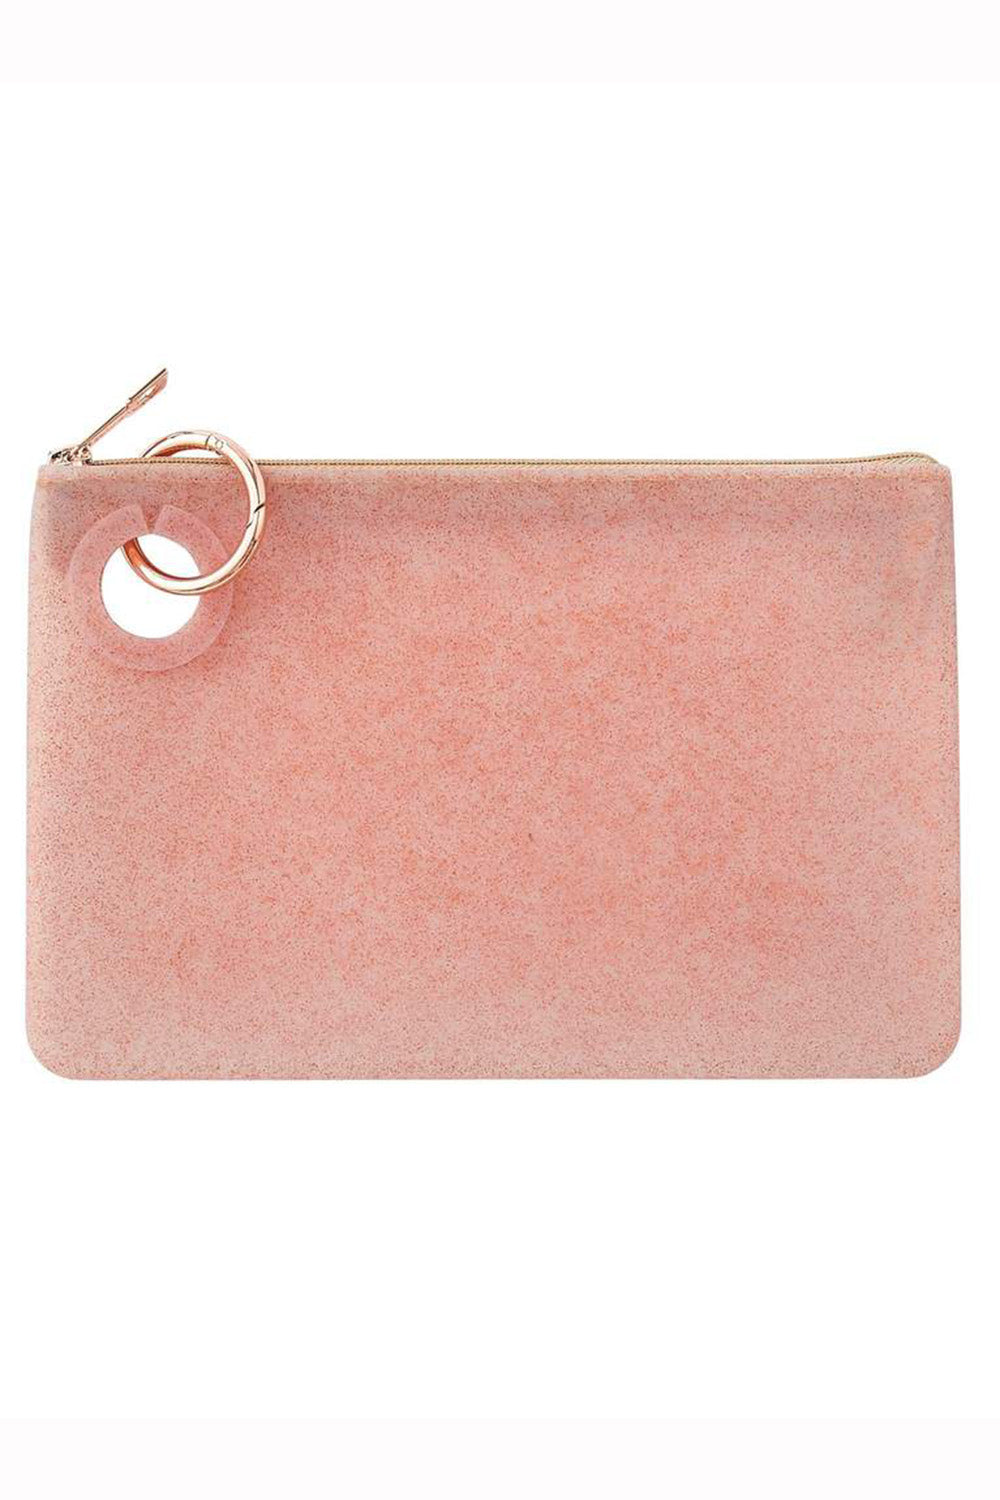 Silicone Pouch Large - Confetti Rose Gold